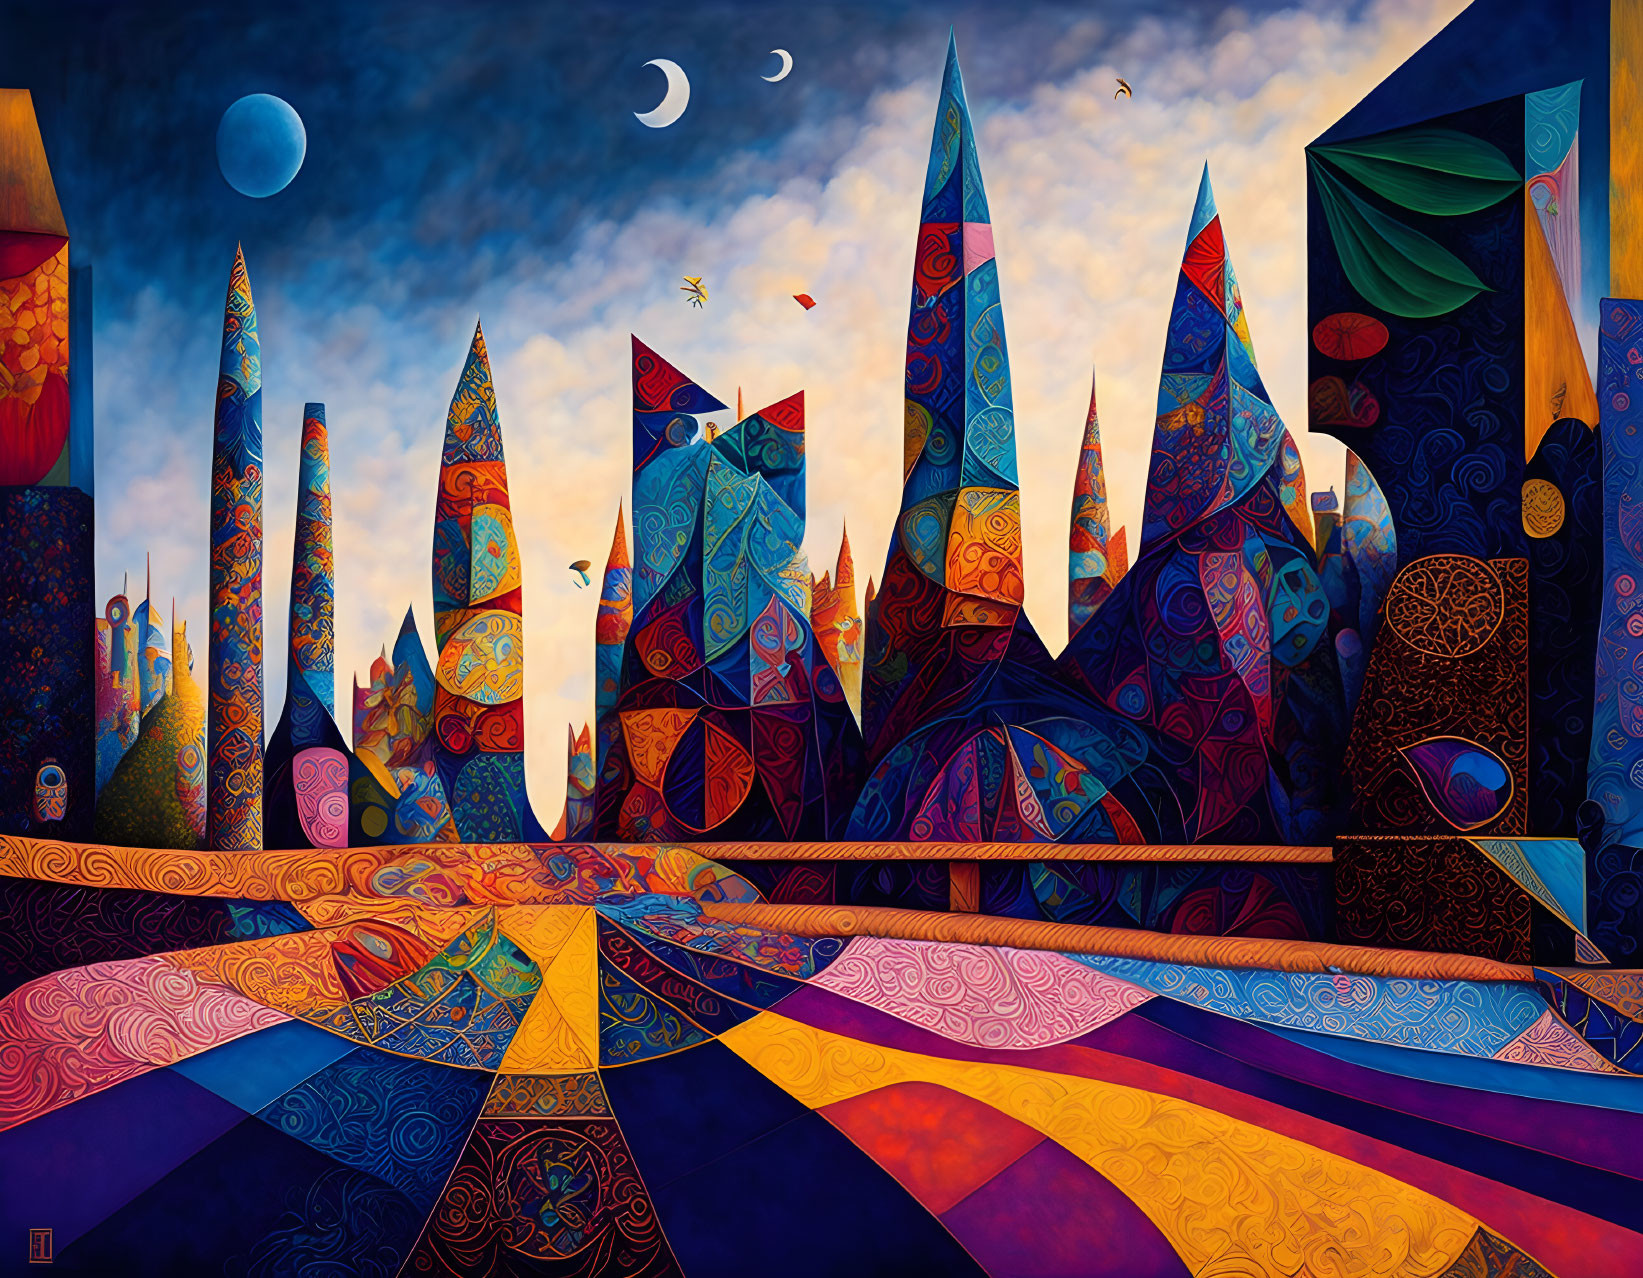 Colorful surreal landscape with sun, moon, spires, birds, and floating crescents